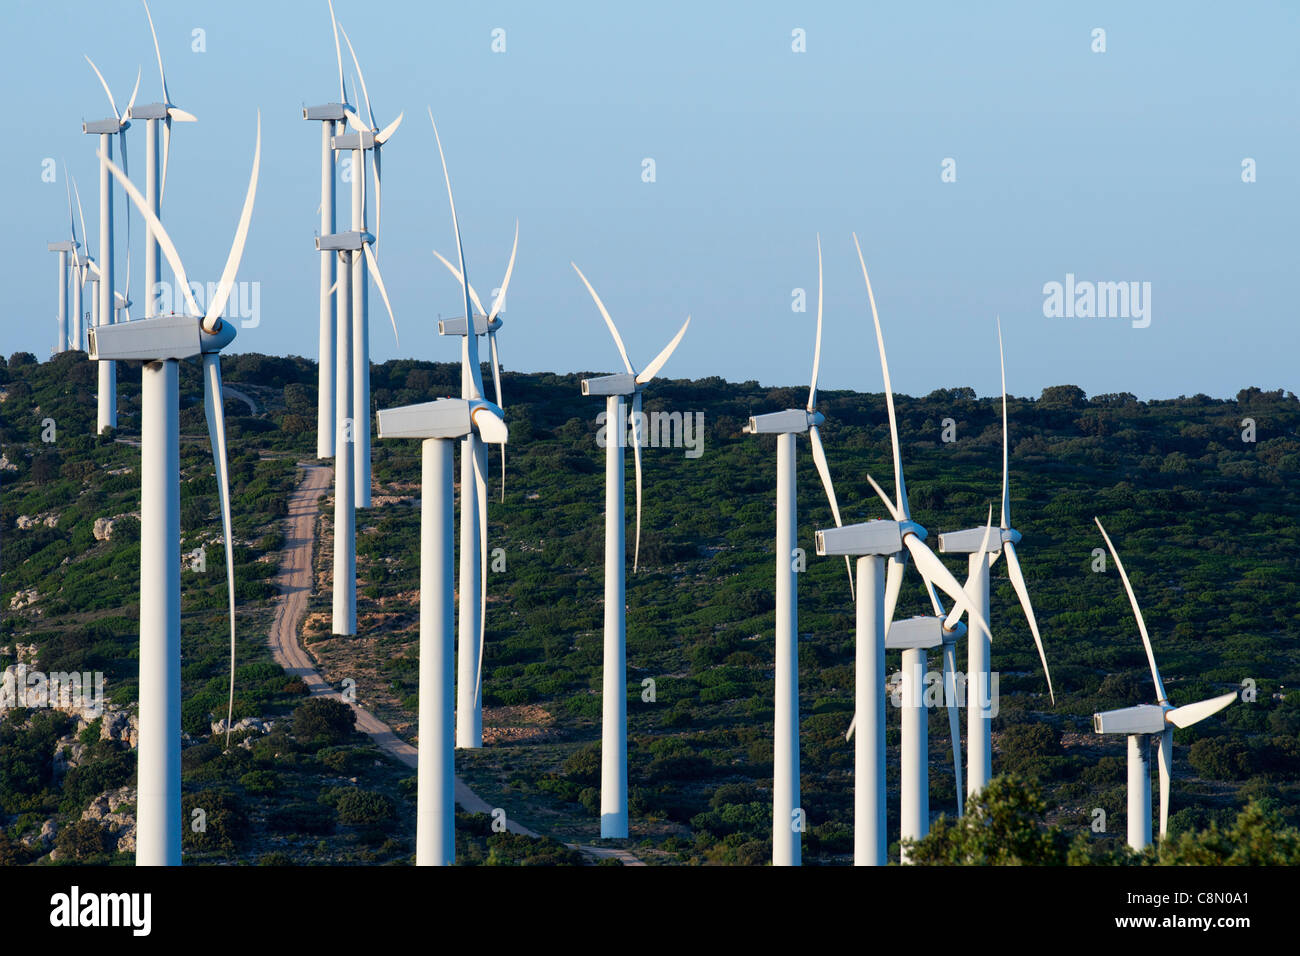 group of windmills in a wooded area, El Buste, Saragosa, Aragon, Spain Stock Photo